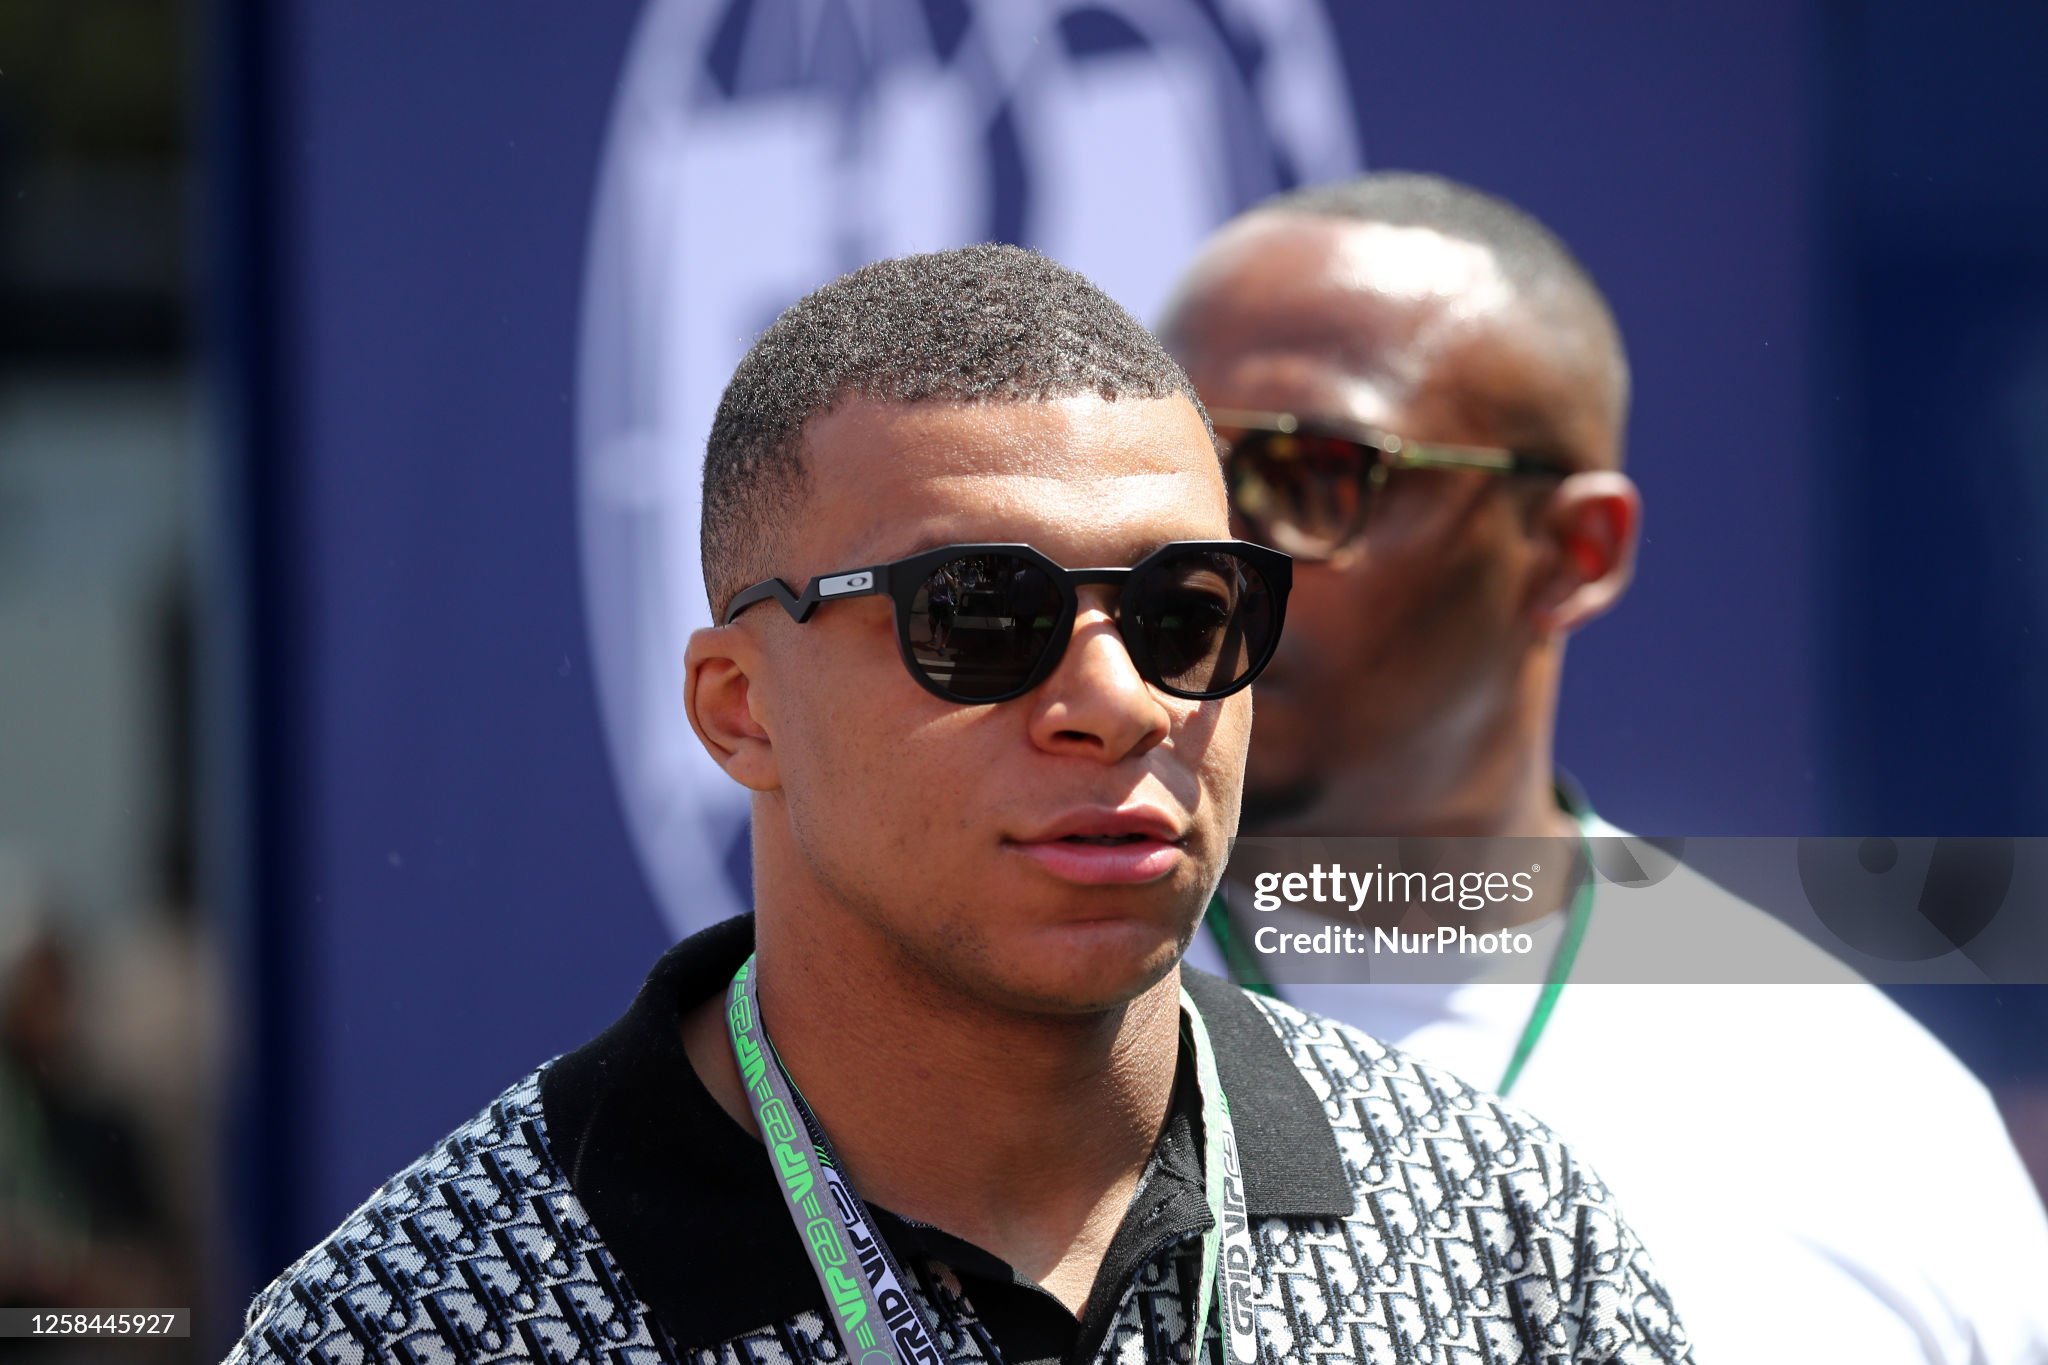 Mbappe speaks out about PSG exit rumors